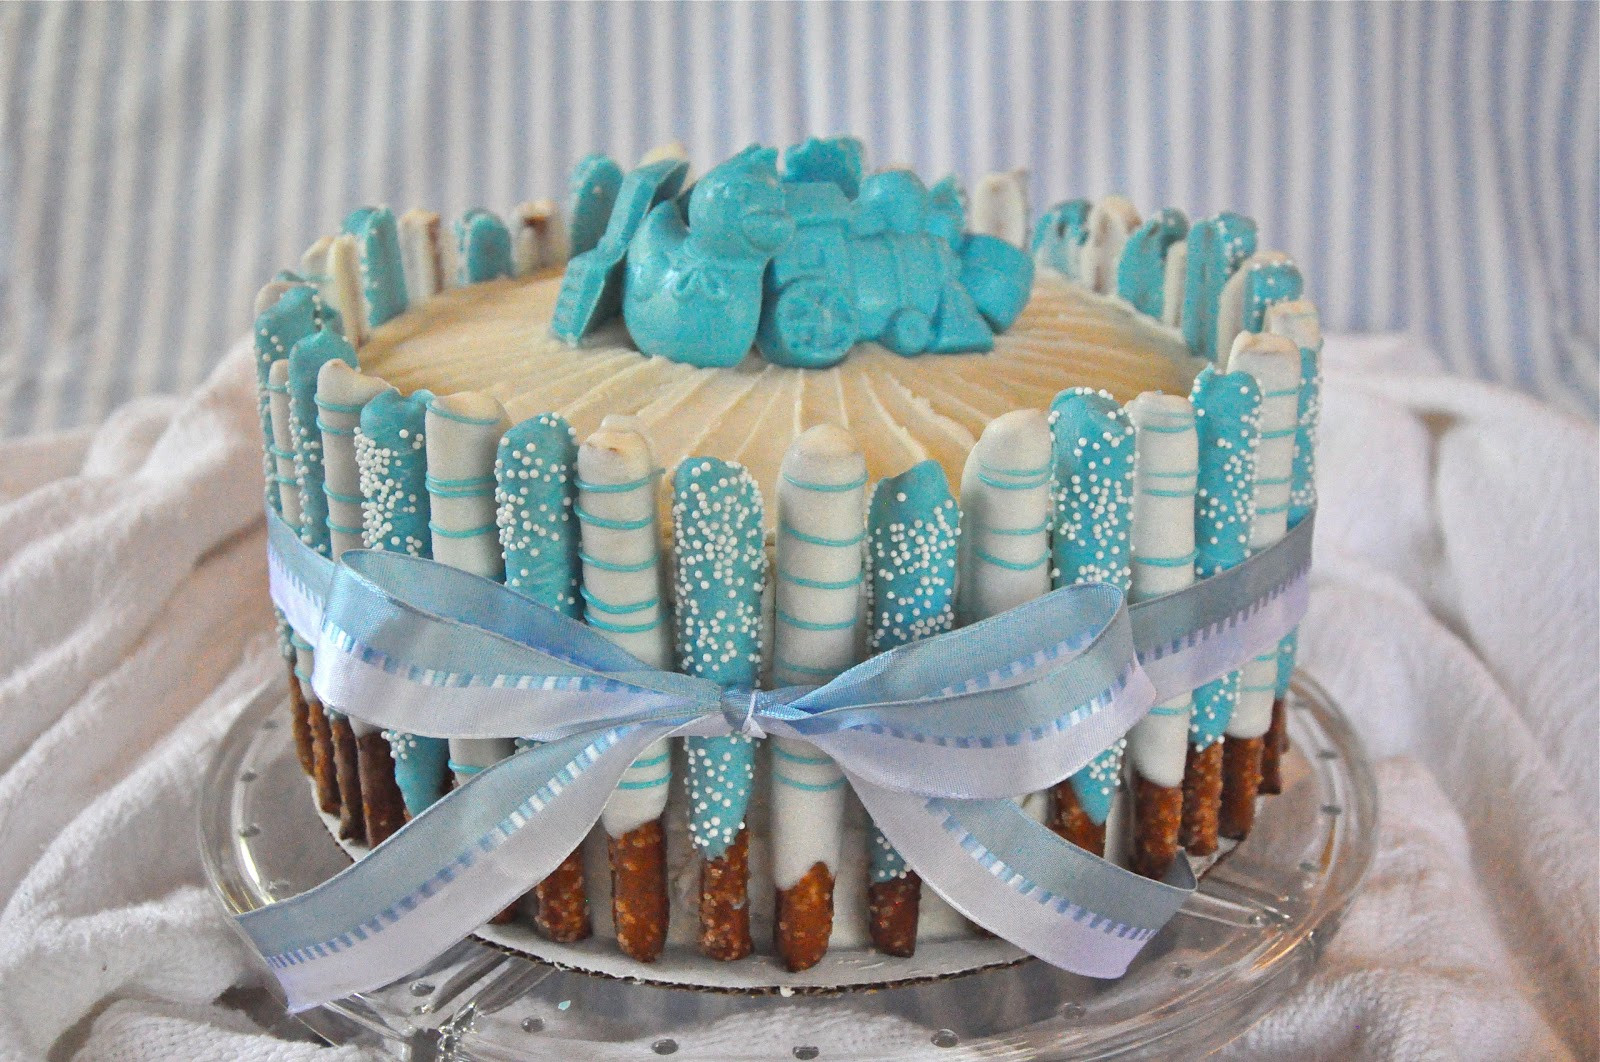 Baby Shower Cake Decorations Ideas
 I think I could do that Blue Baby Boy Shower Cake